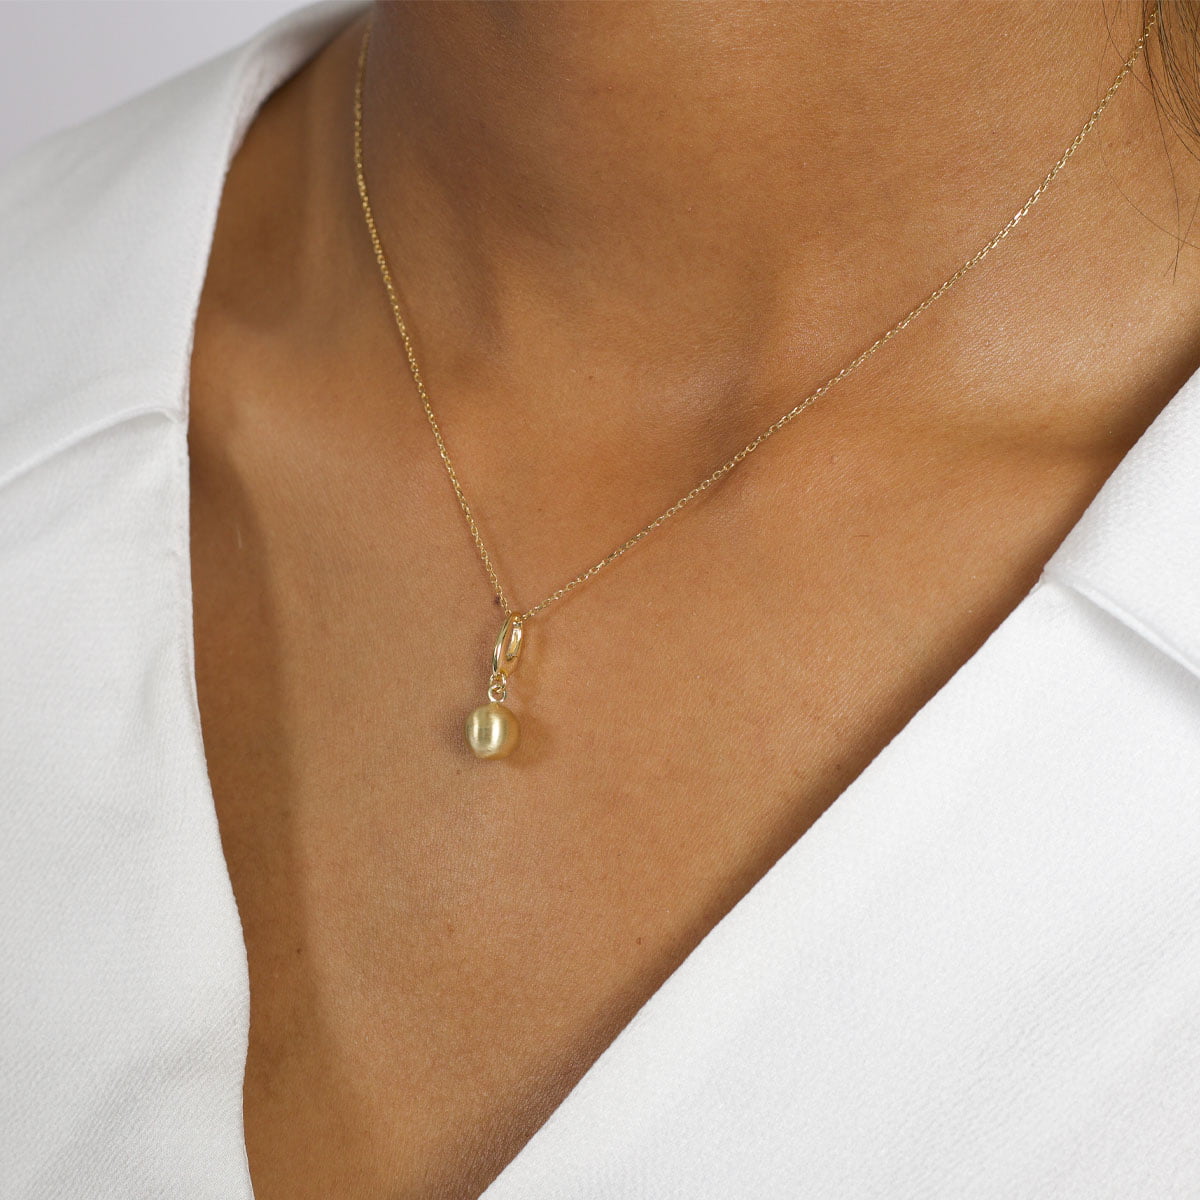 Fine 18ct Yellow Gold Ball Pendant Charm Necklace for Women